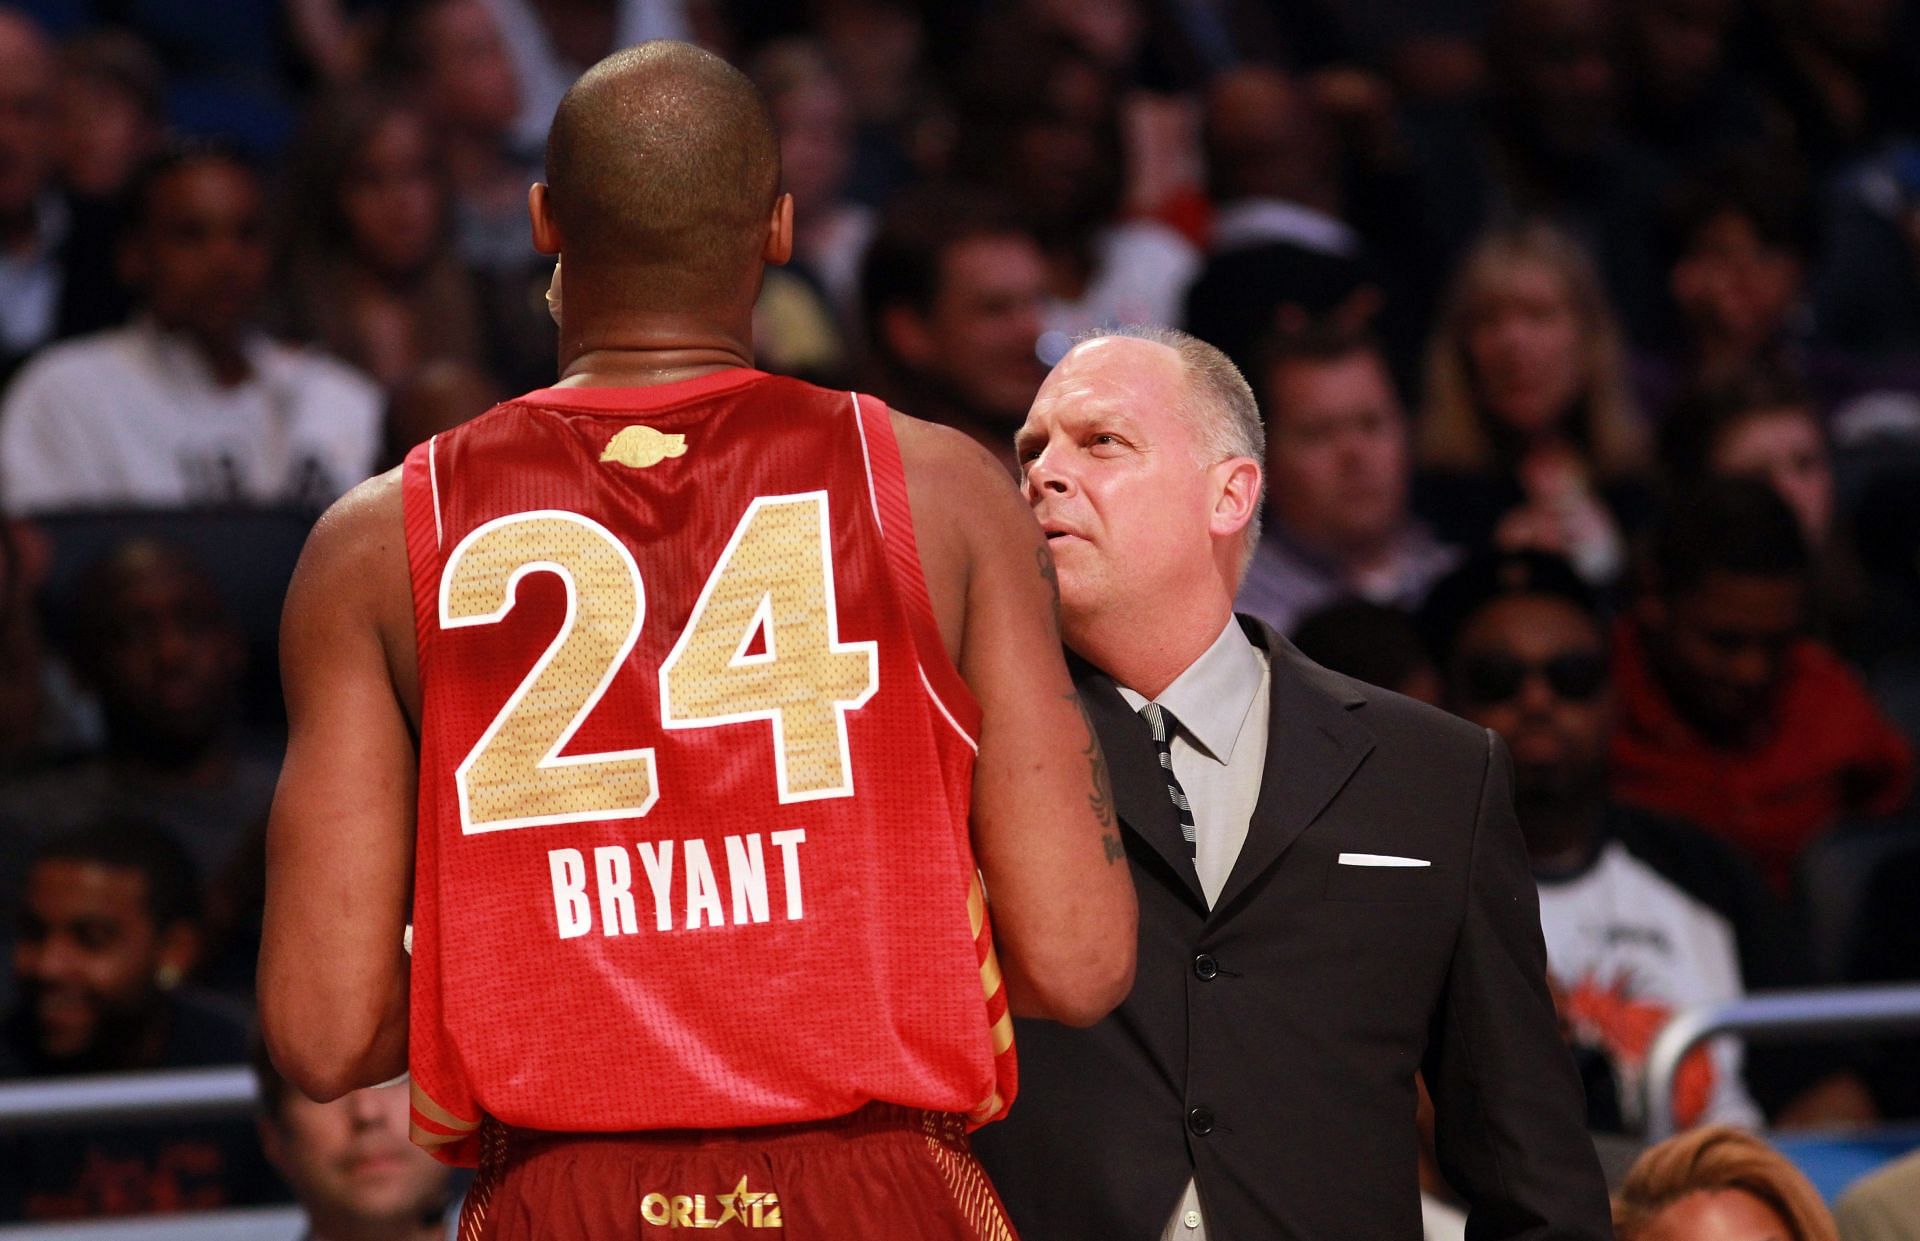 Bryant was selected to play in the 2015 NBA All-Star Game (Image via Getty Images)